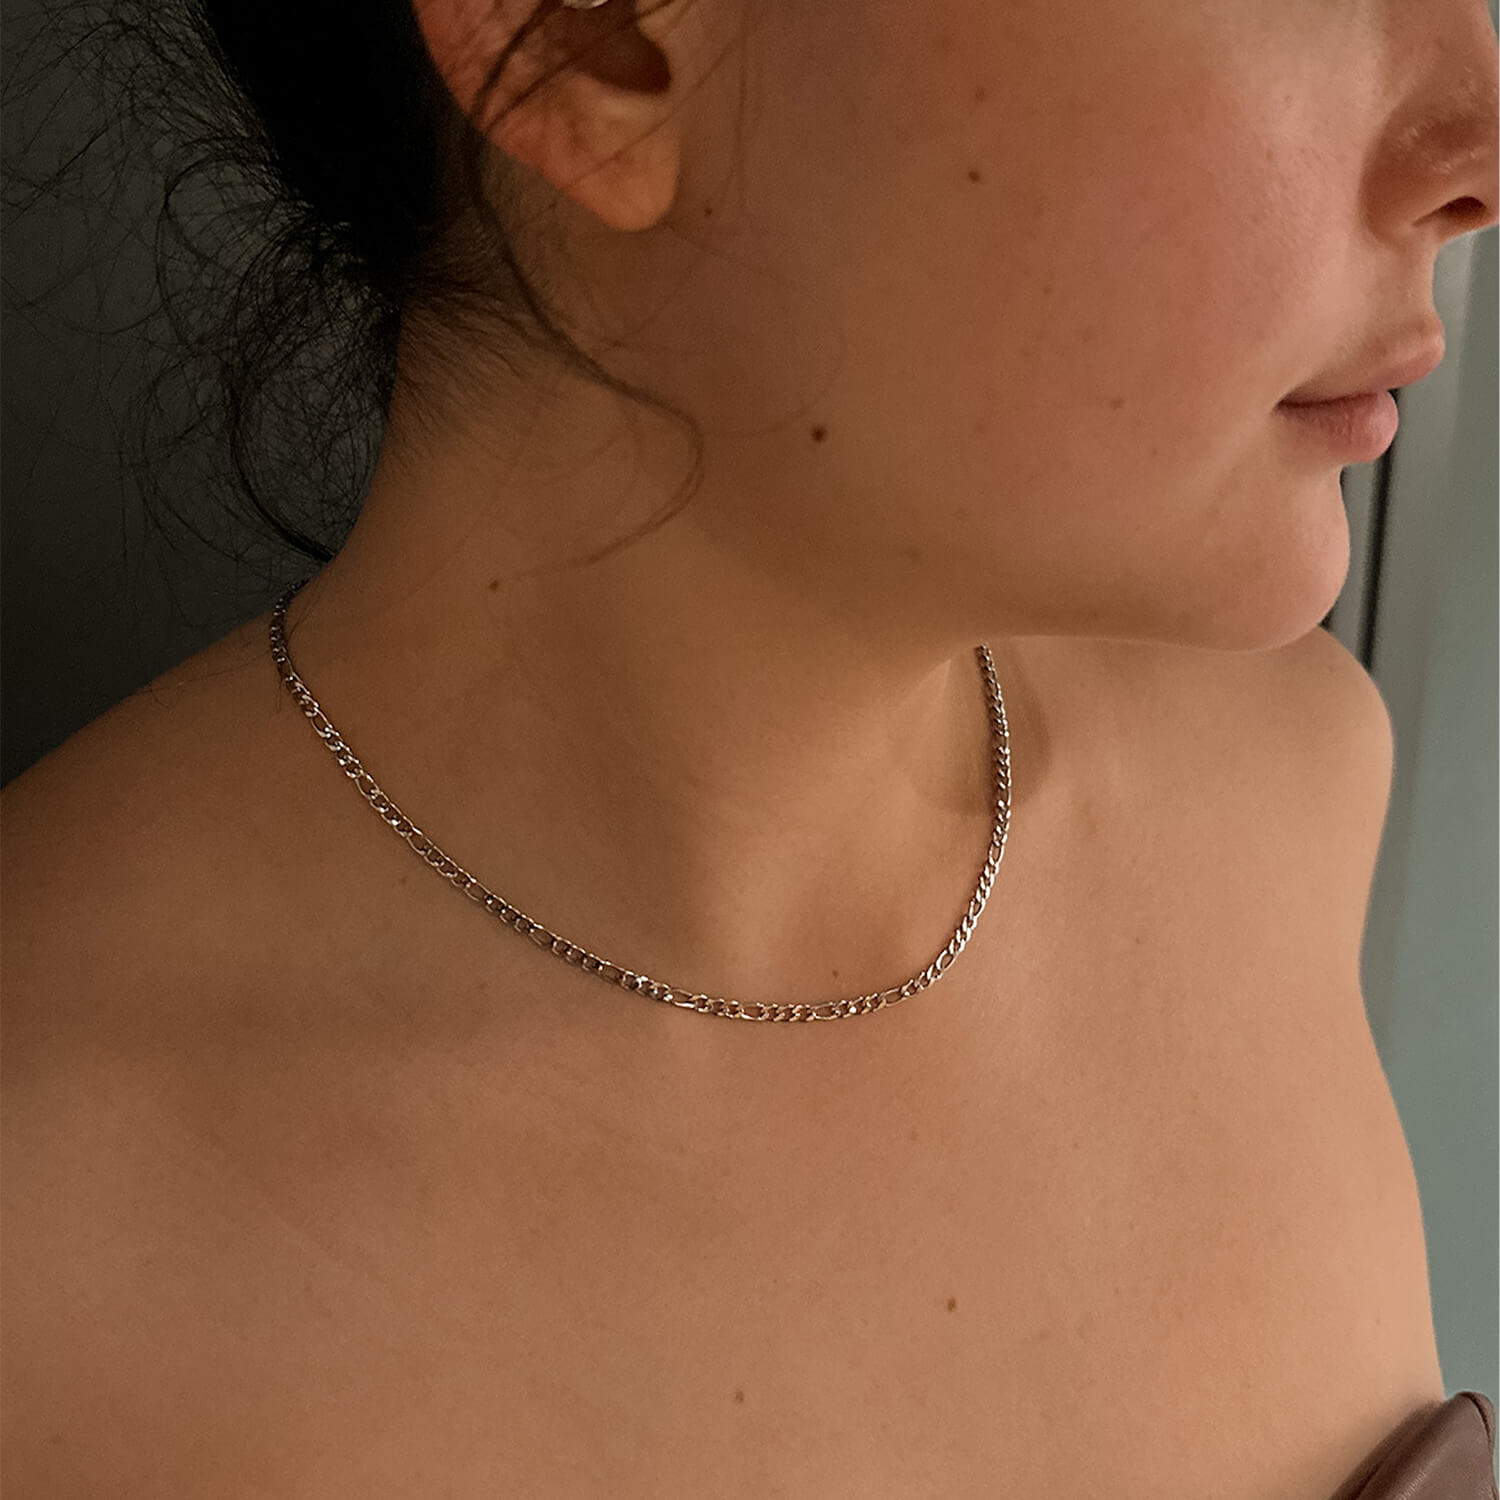 female wearing 3mm silver figaro chain on neck